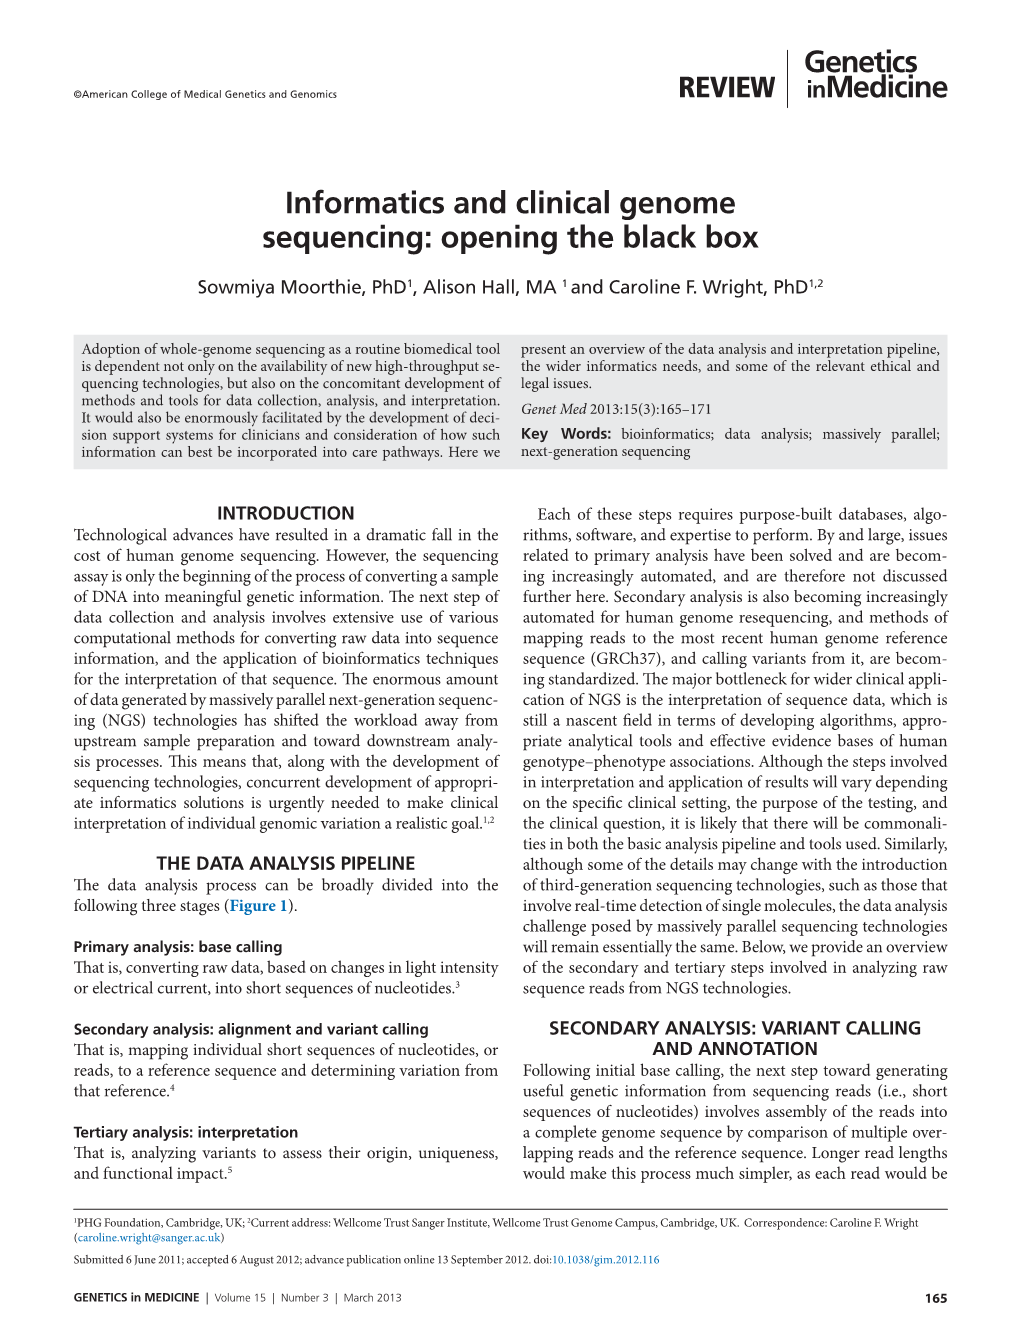 Informatics and Clinical Genome Sequencing: Opening the Black Box